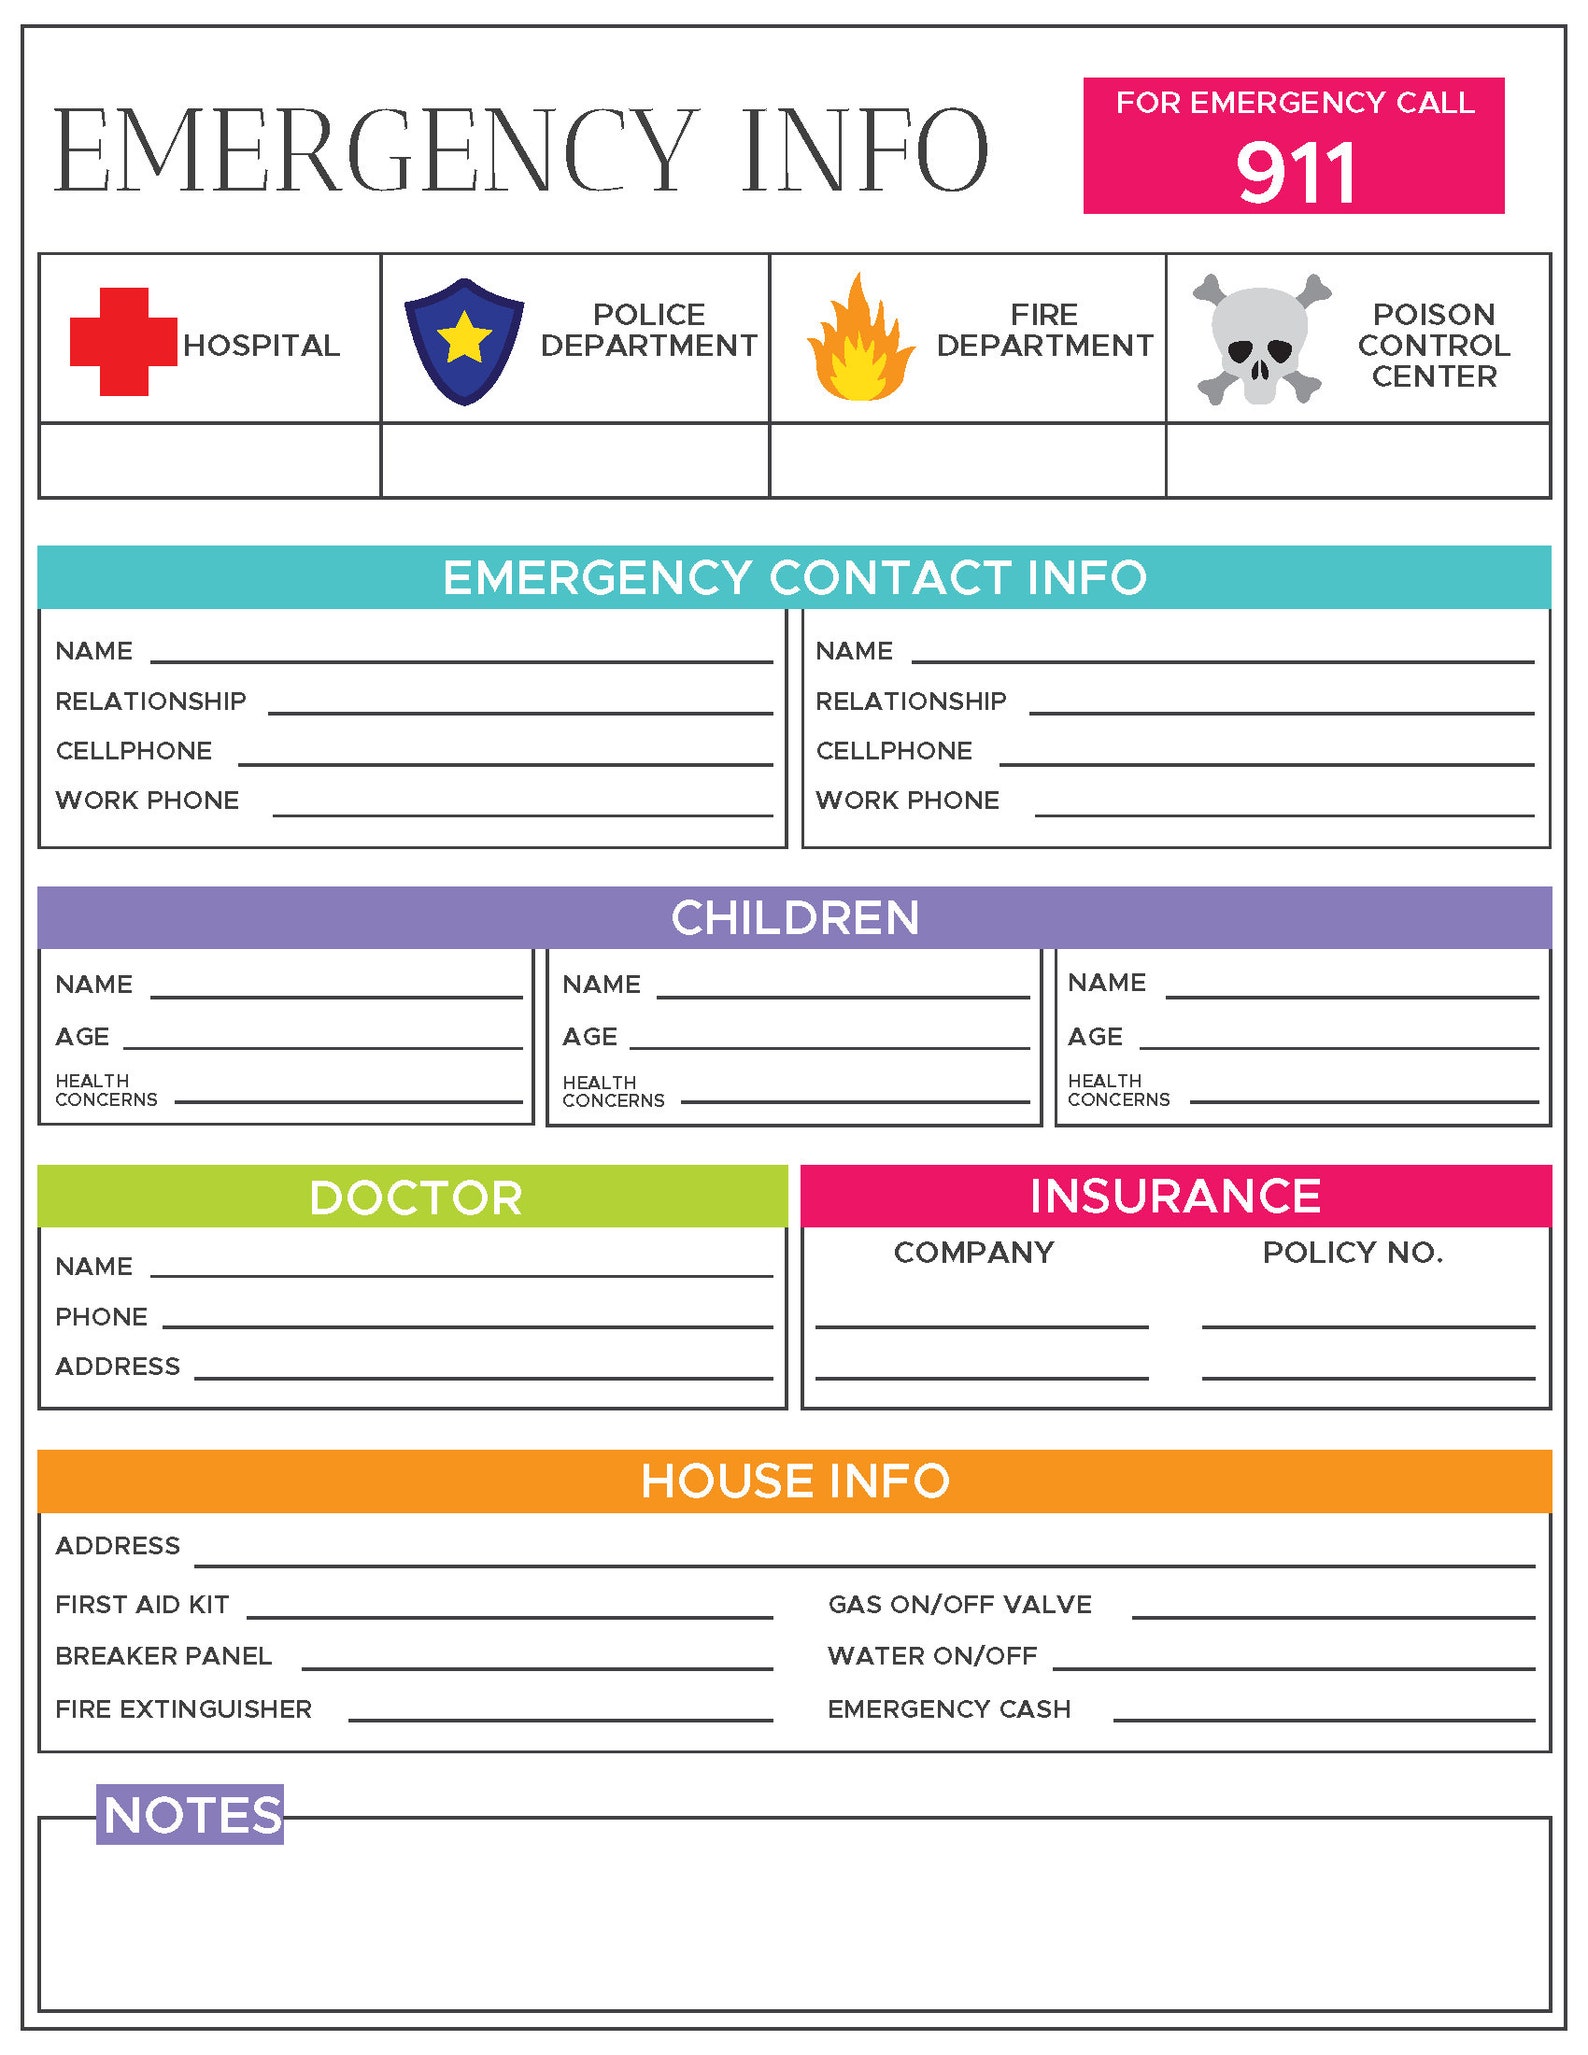 emergency-information-sheet-emergency-contact-information-etsy